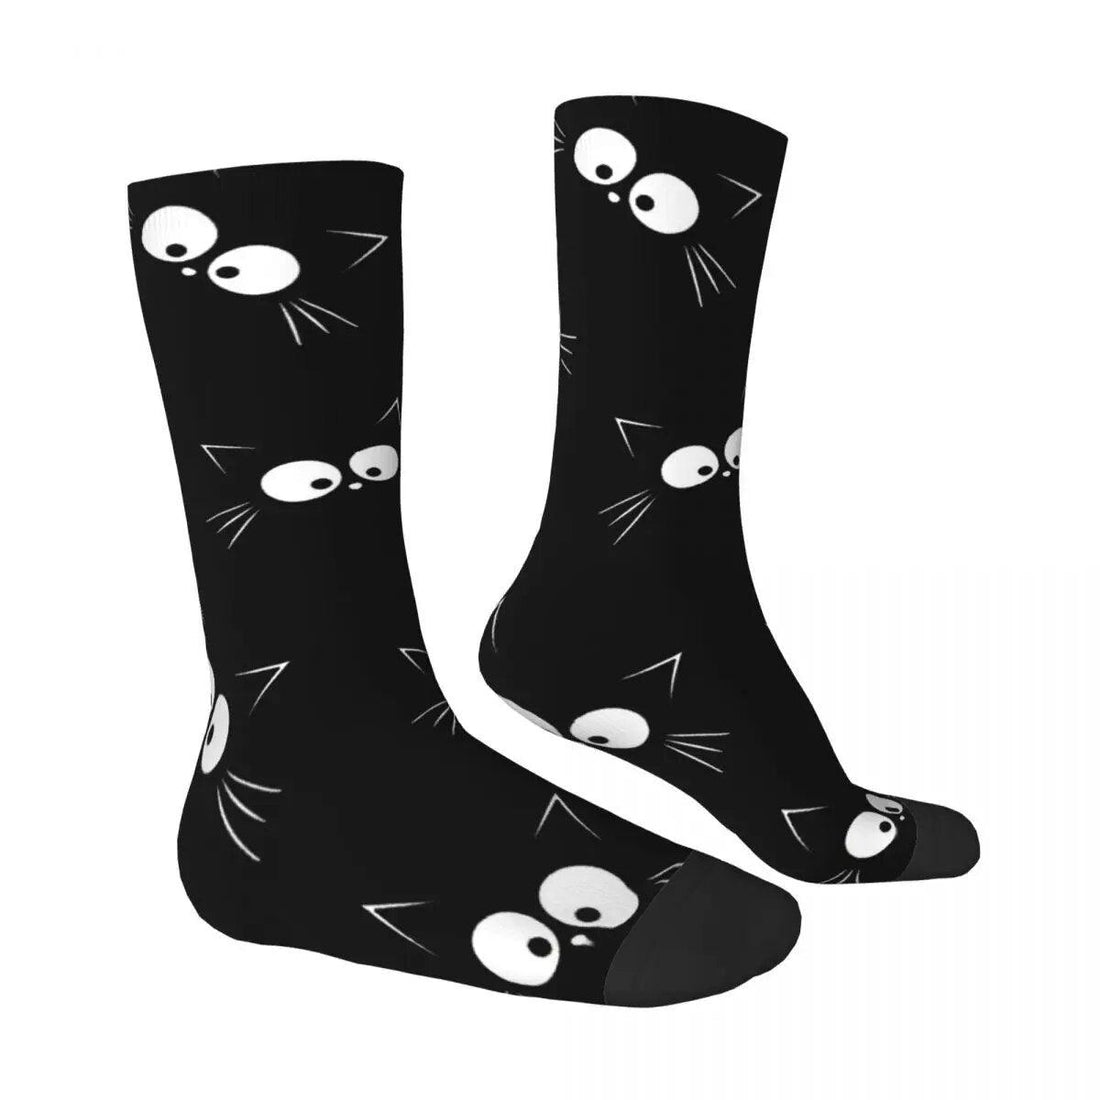 Cartoon Cat Faces Socks - Just Cats - Gifts for Cat Lovers